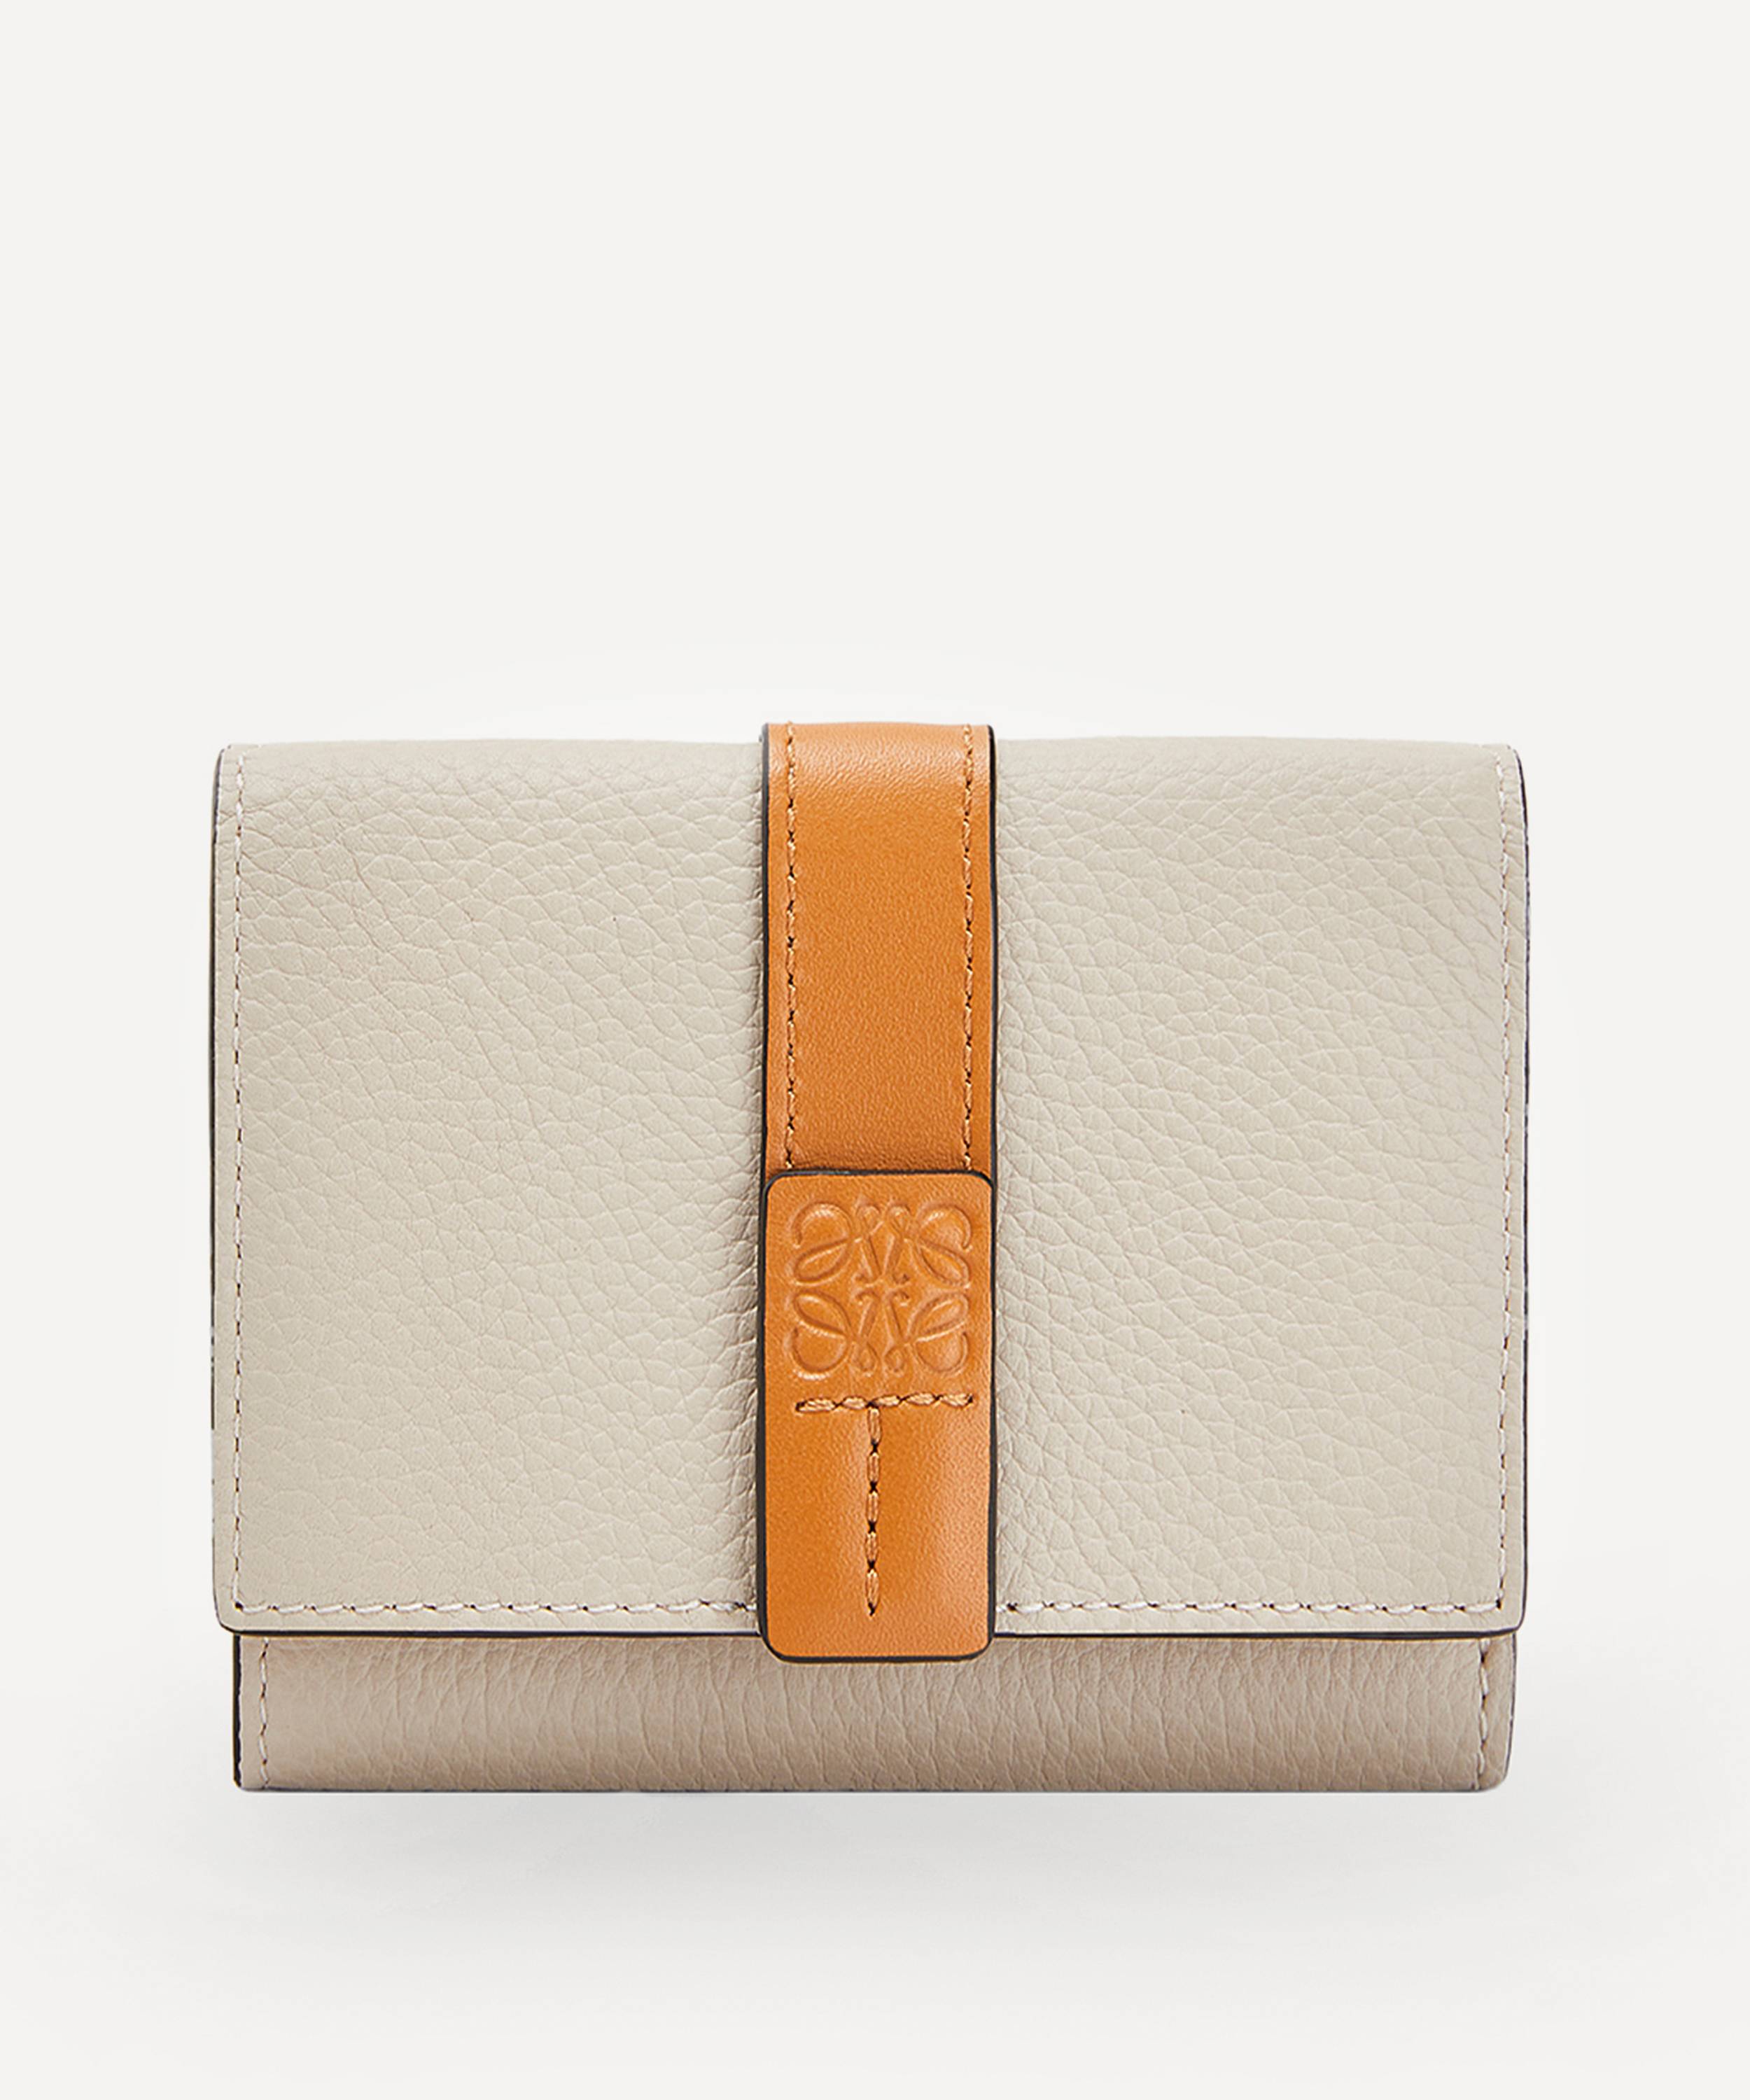 Loewe Trifold Leather Wallet | Liberty